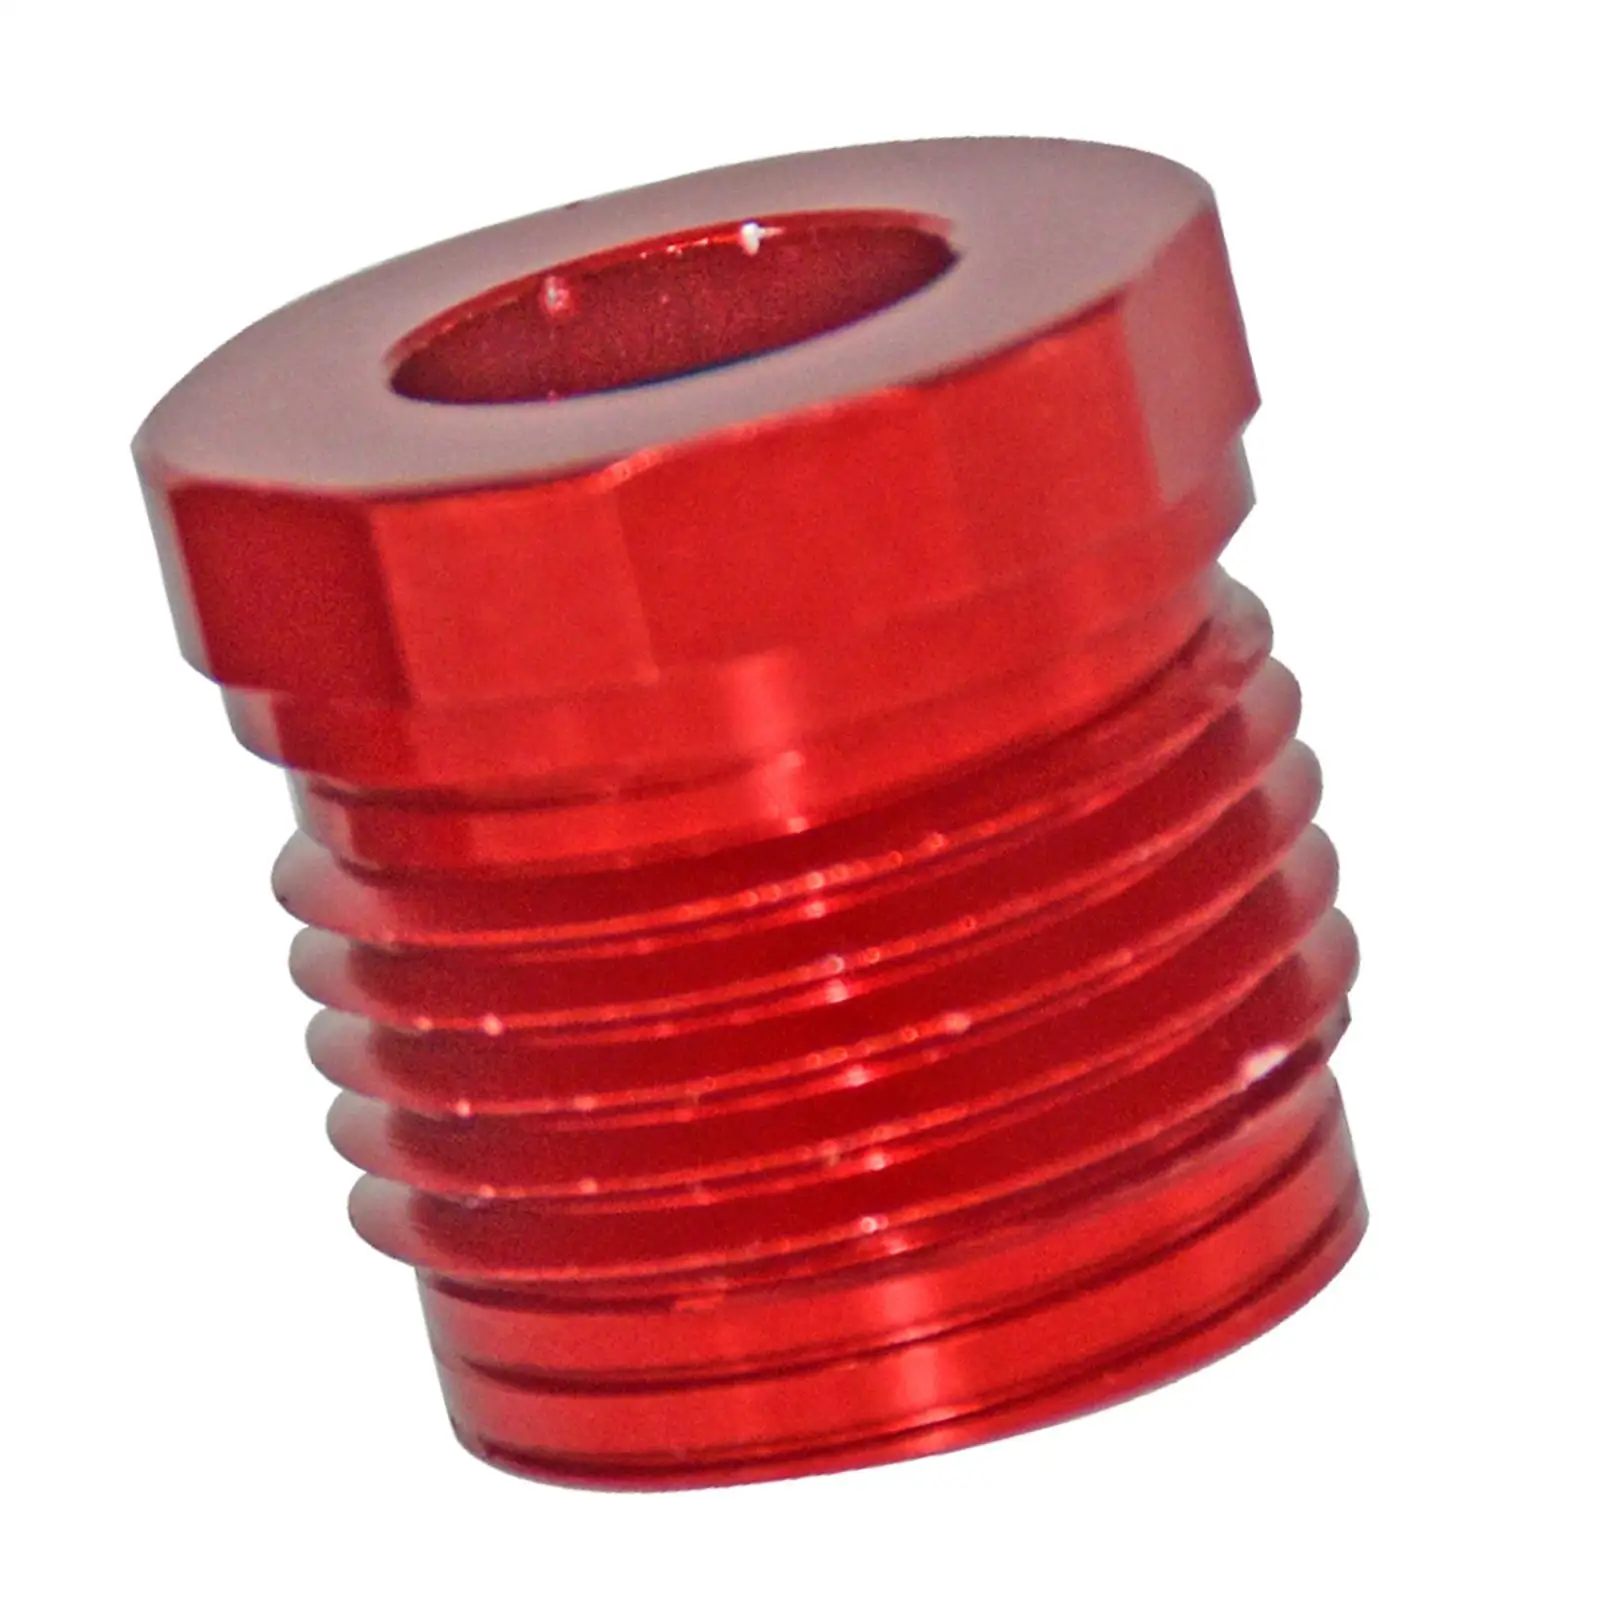 Steering and Reverse Cable Lock Nut Durable Replacement Professional Red Cable